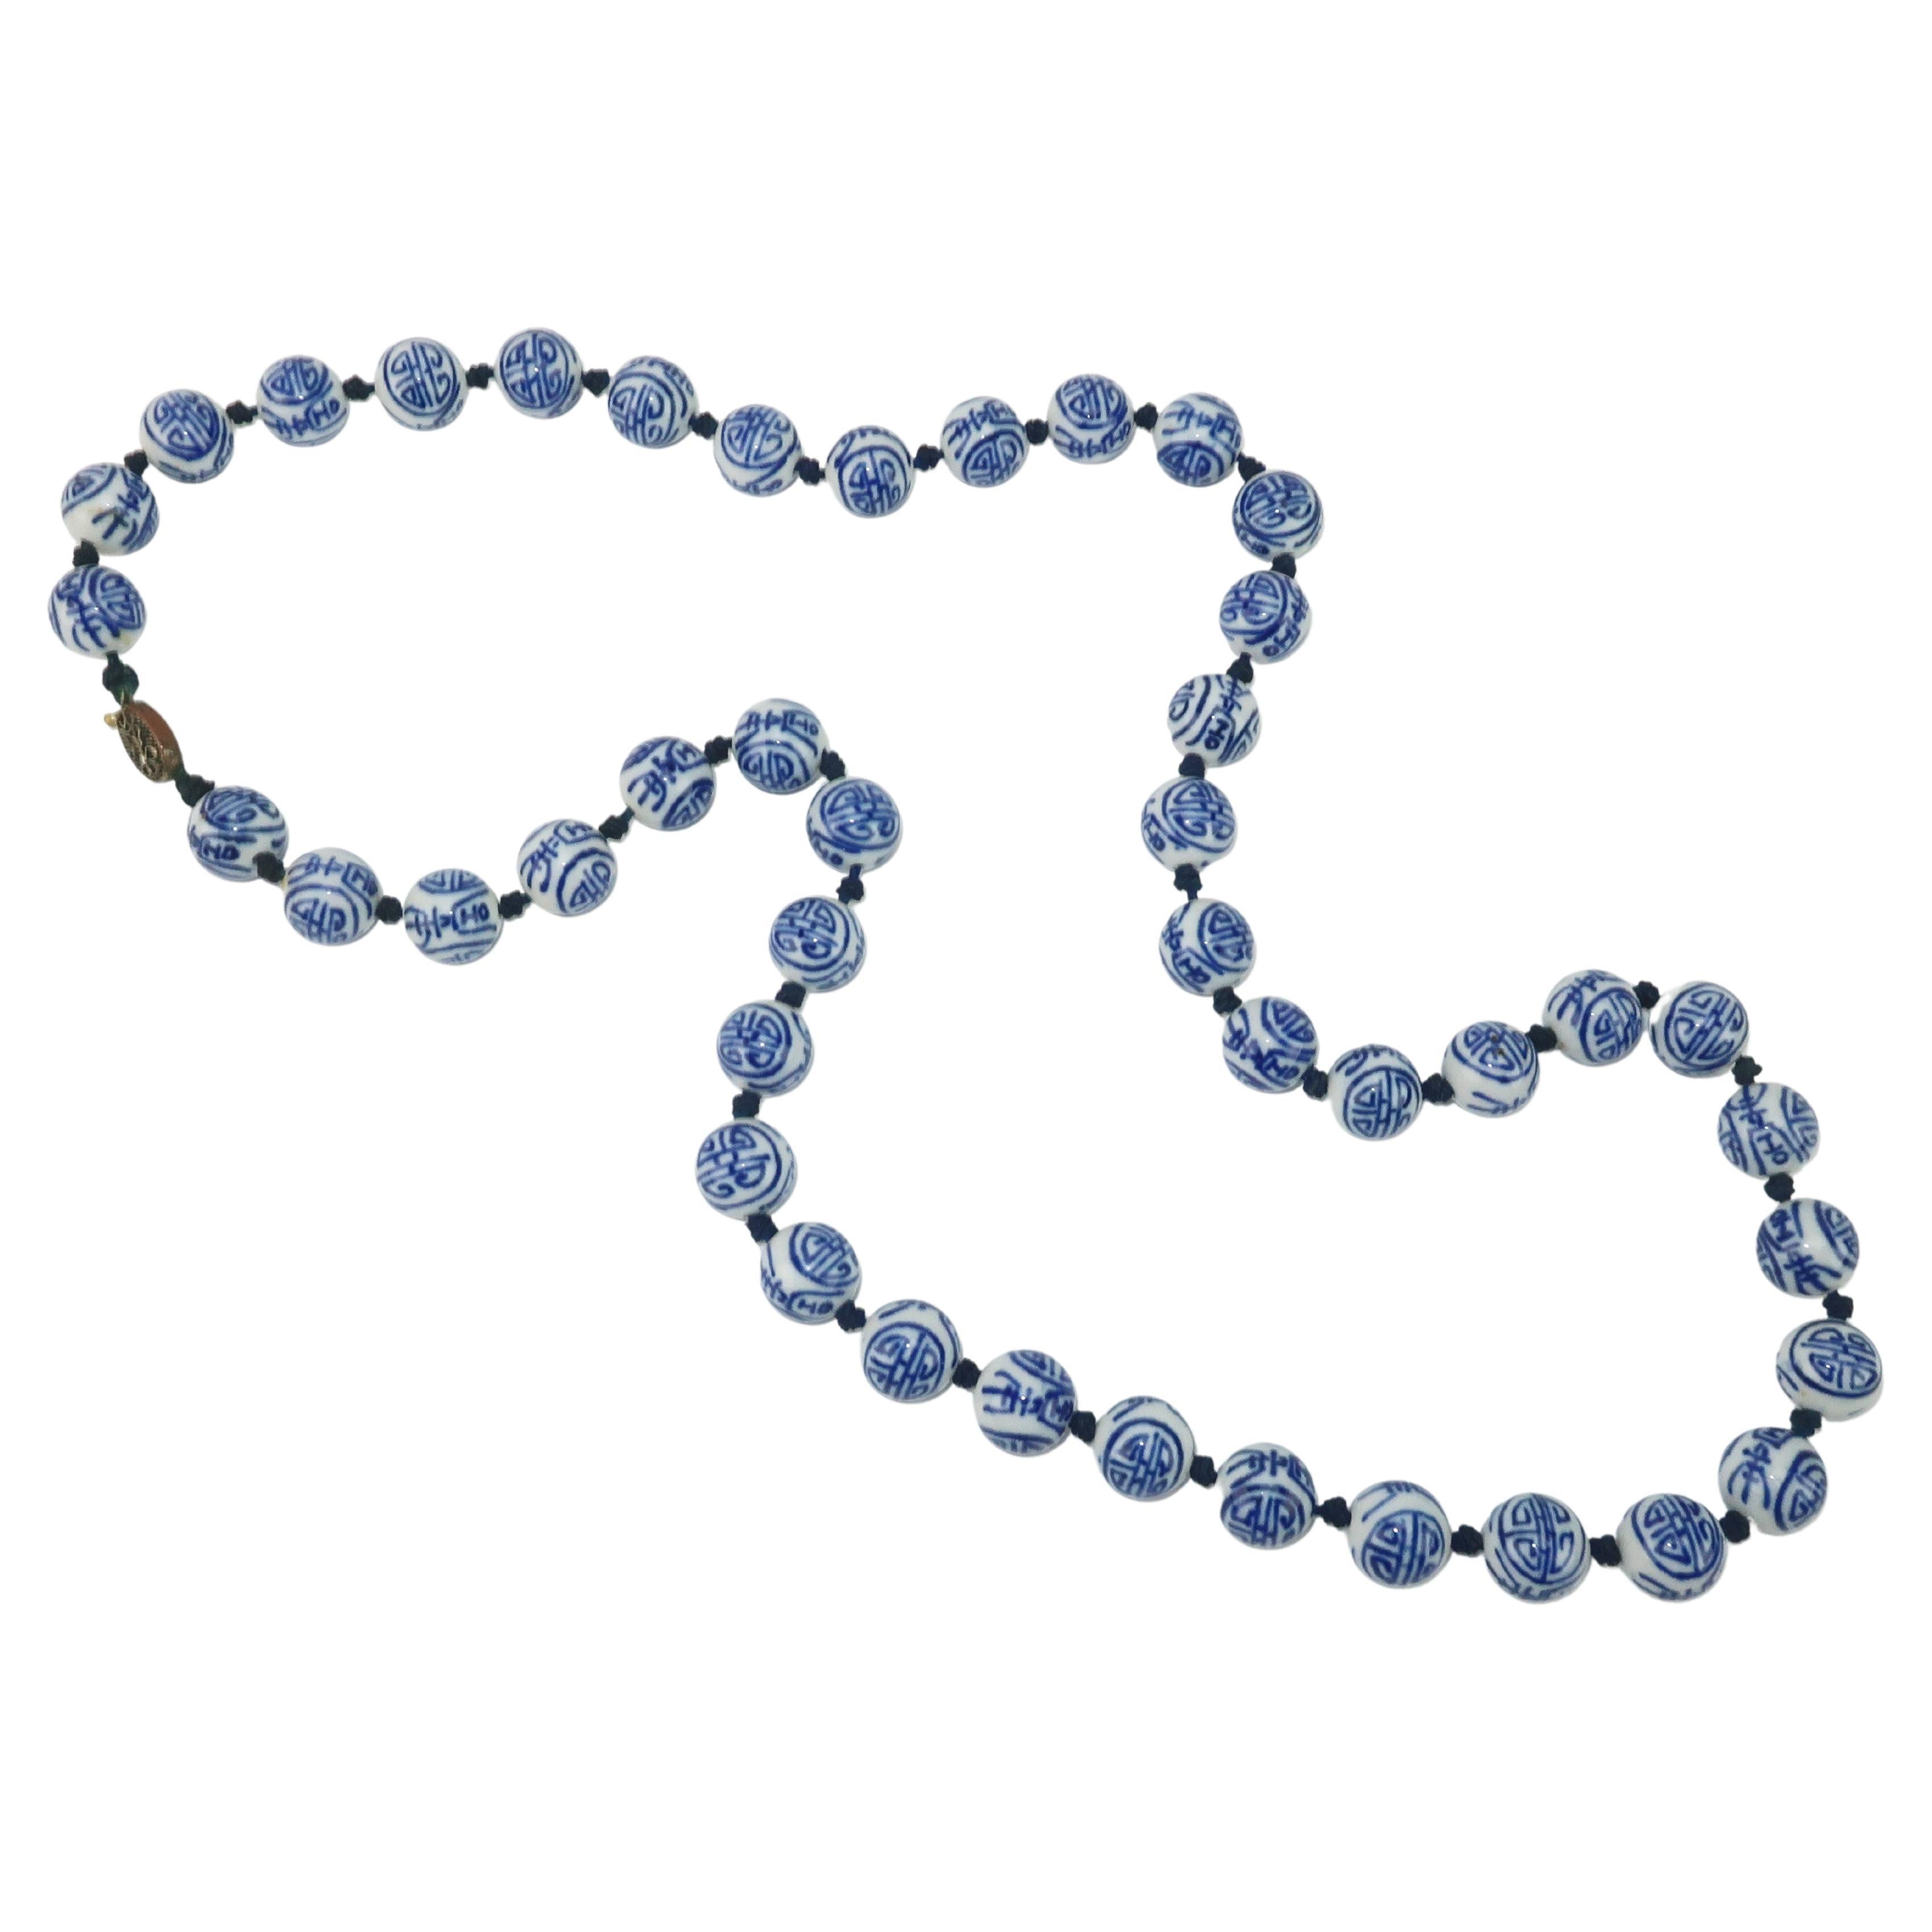 Chinese Blue & White Porcelain Bead Necklace, 1950's